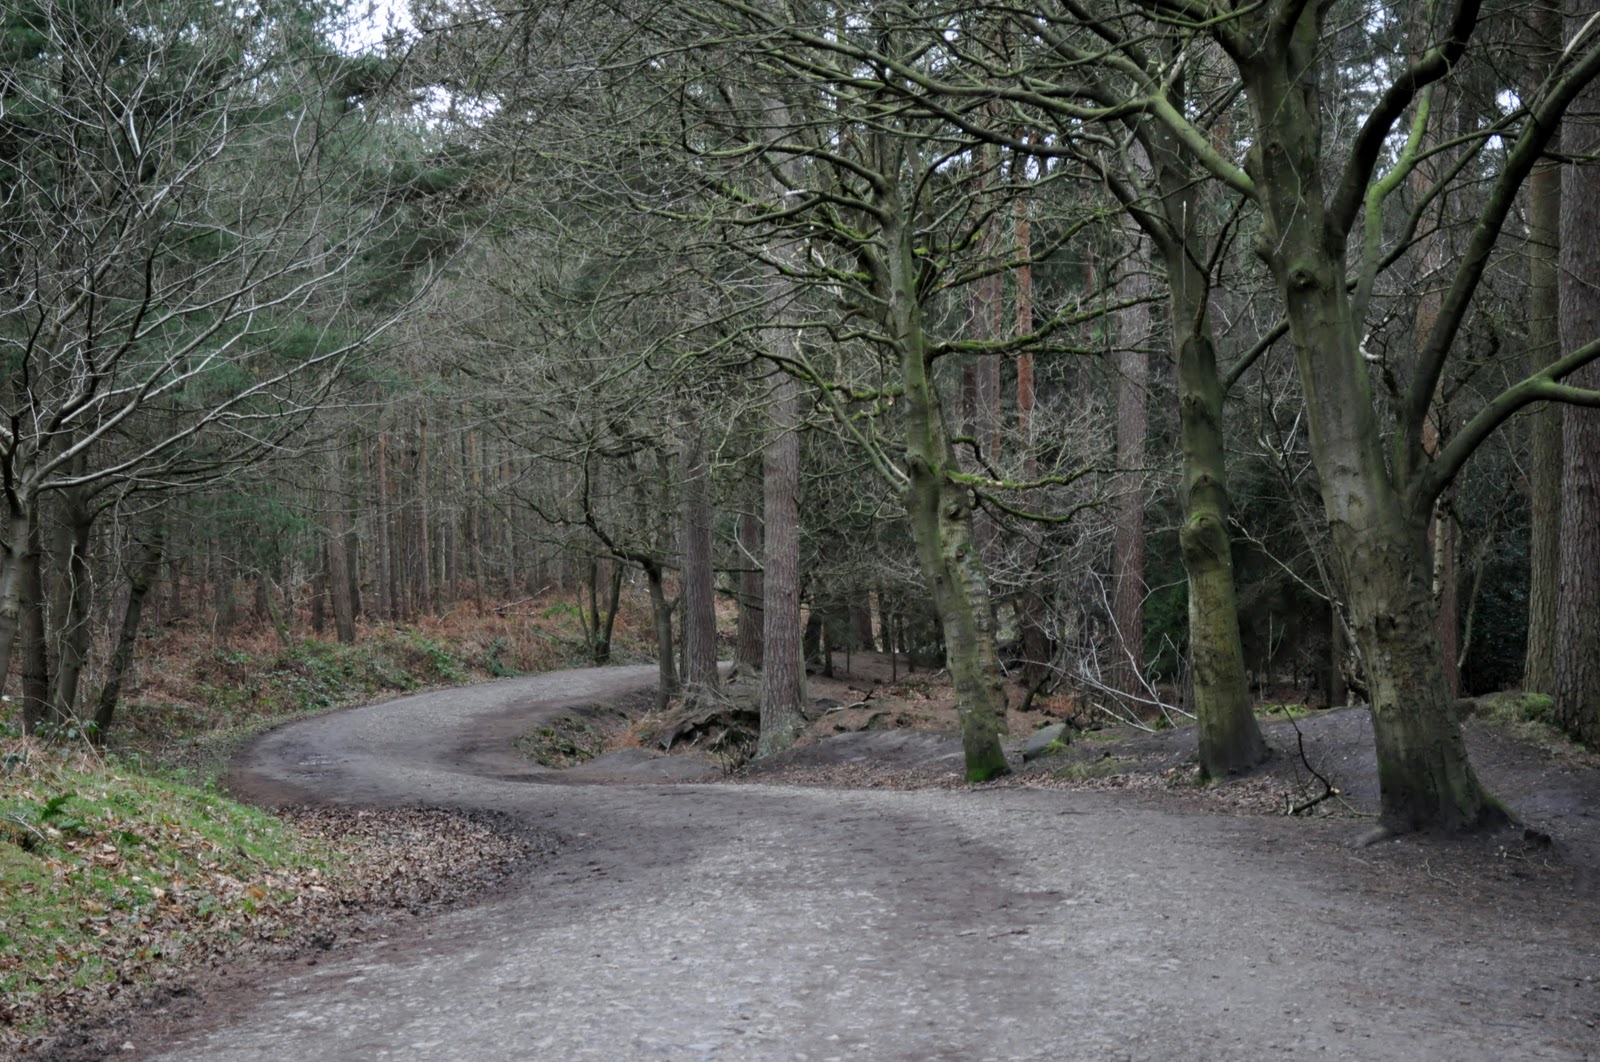 Download this Delamere Forest Jan picture